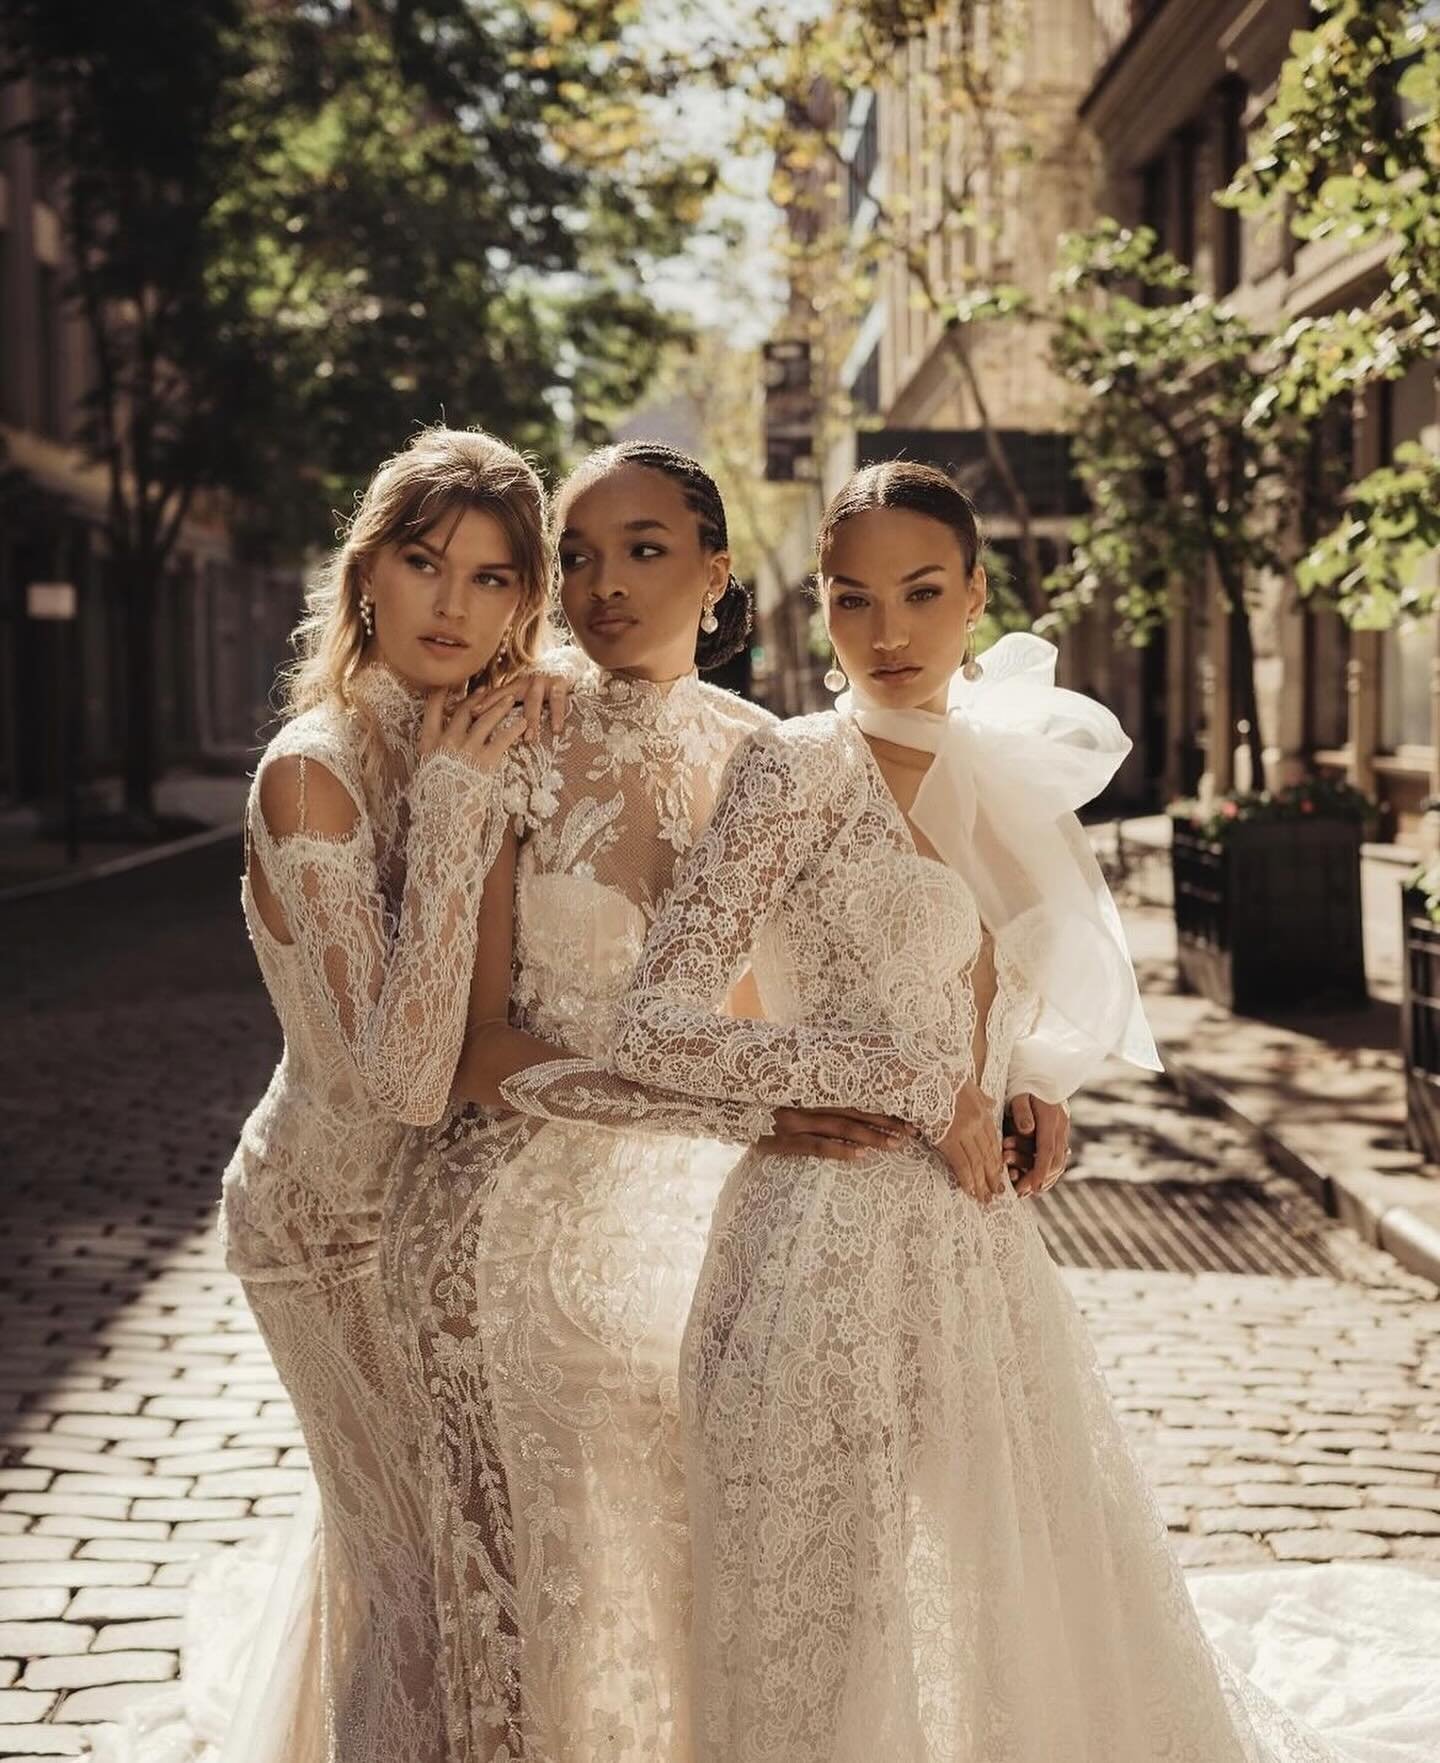 Our @galialahav Trunk Show is coming up soon! 🤩🙌 We&rsquo;ll have some of the most iconic &amp; favorite pieces from the collections visiting us from April 25-28!

The *perfect* time to say YES to your dream dress ✨